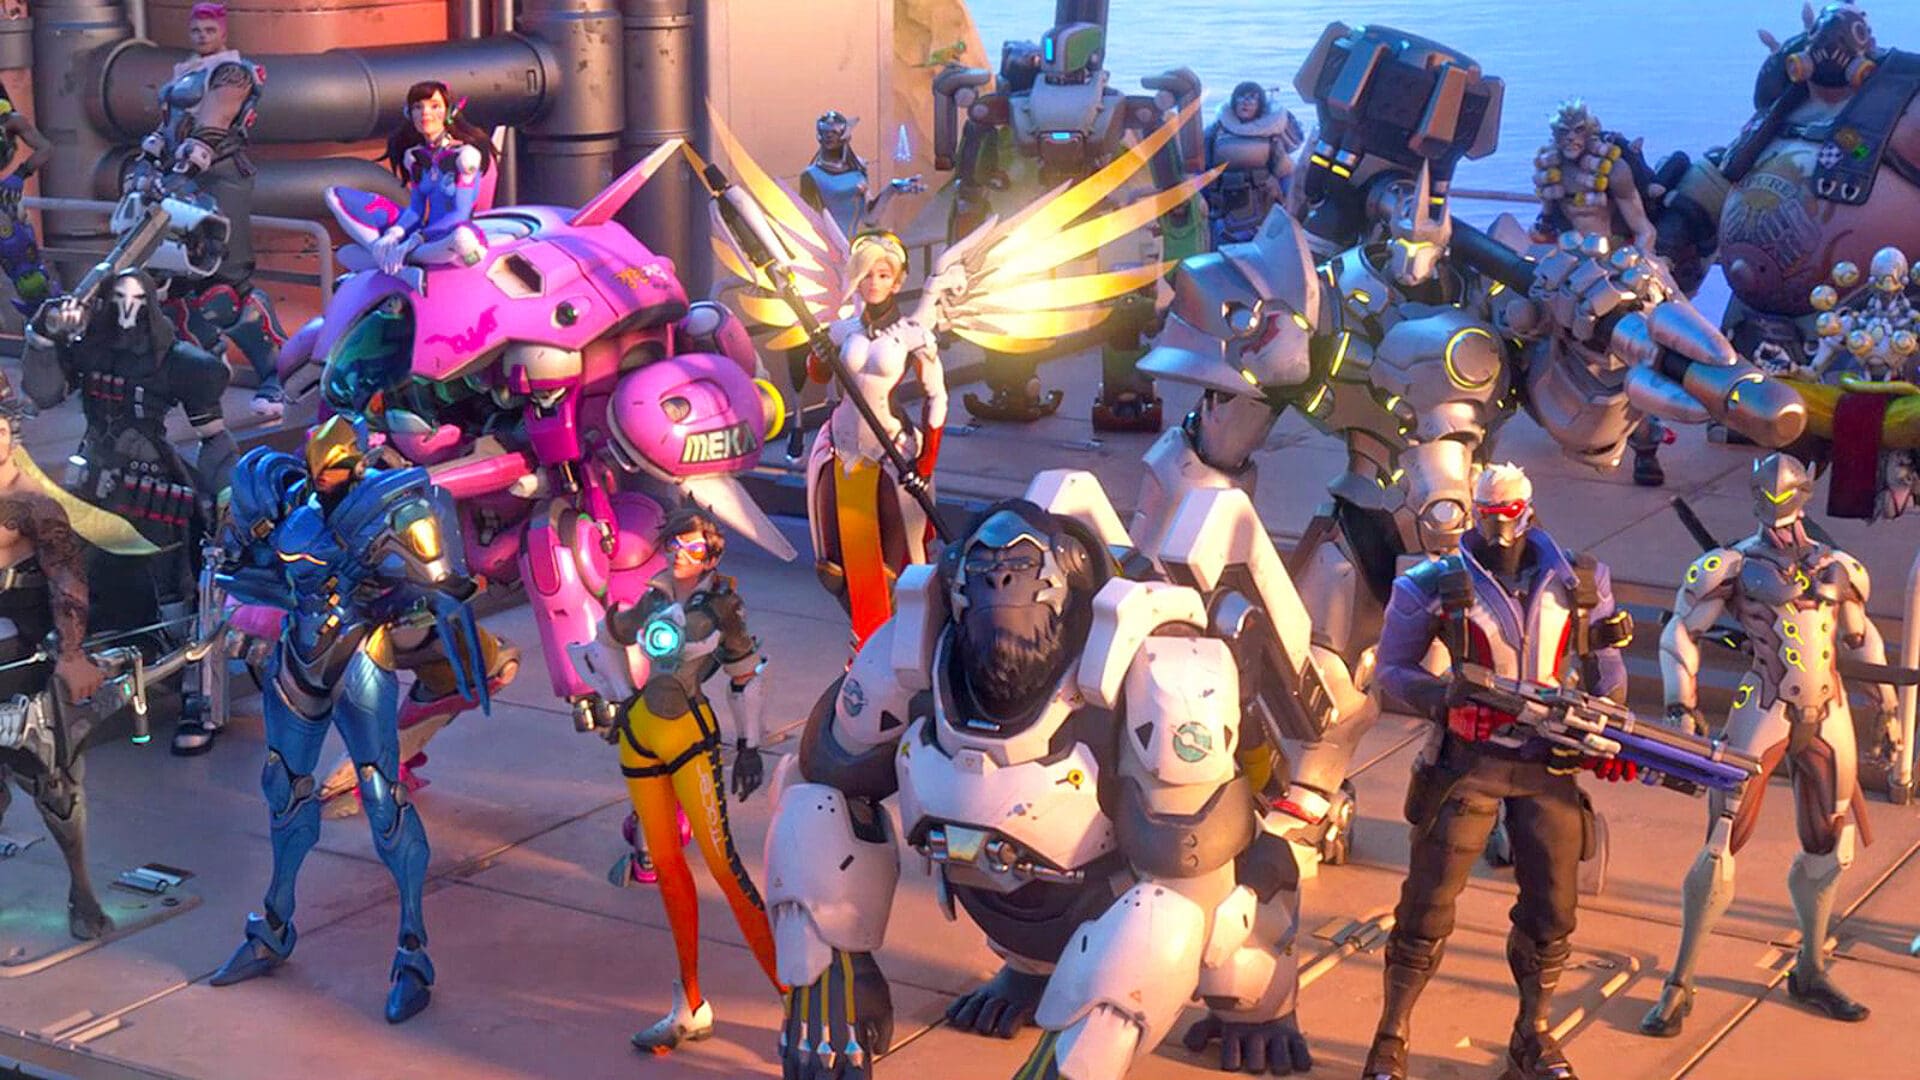 Overwatch Free to Play 11/18 to 11/21 on all Formats